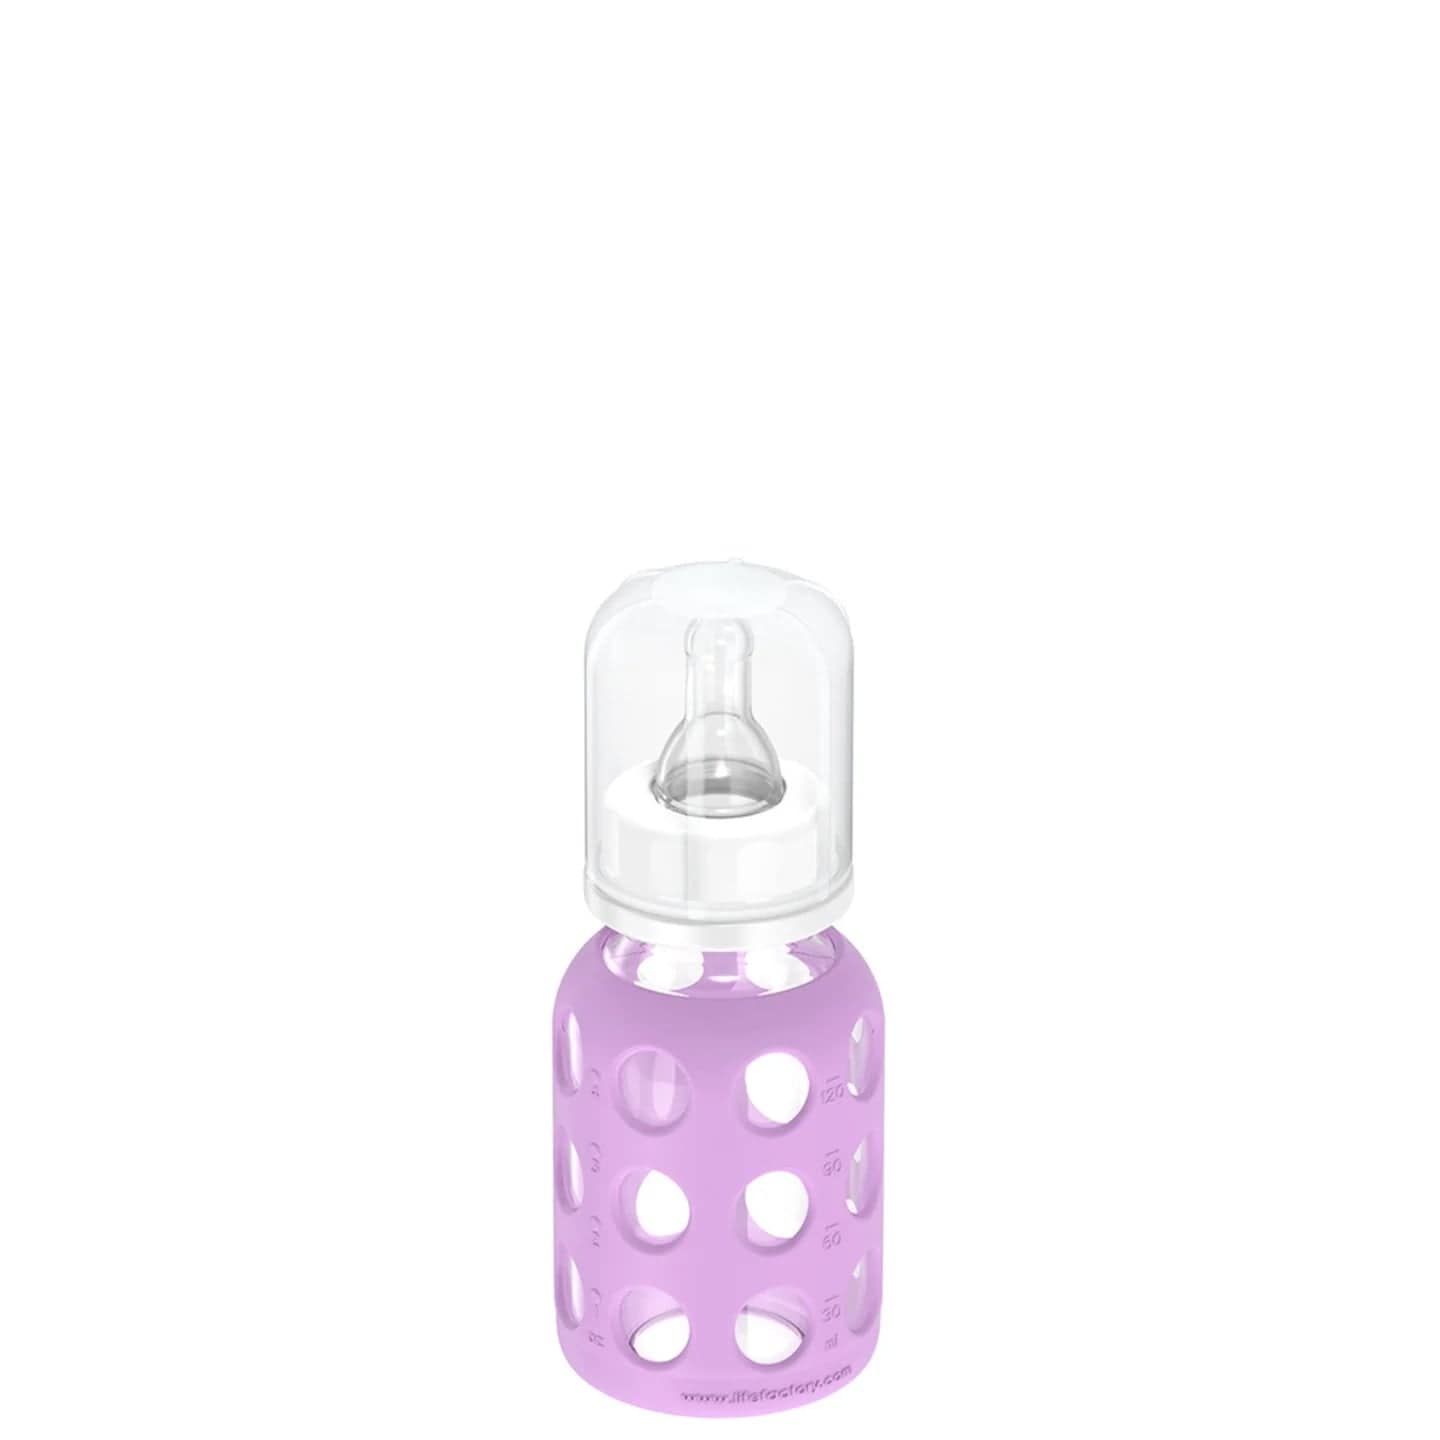 Lifefactory Soother (Lavender) Lifefactory 4oz Glass Baby Bottle - Stage 1 Nipple, Stopper, and Cap (Lavender)